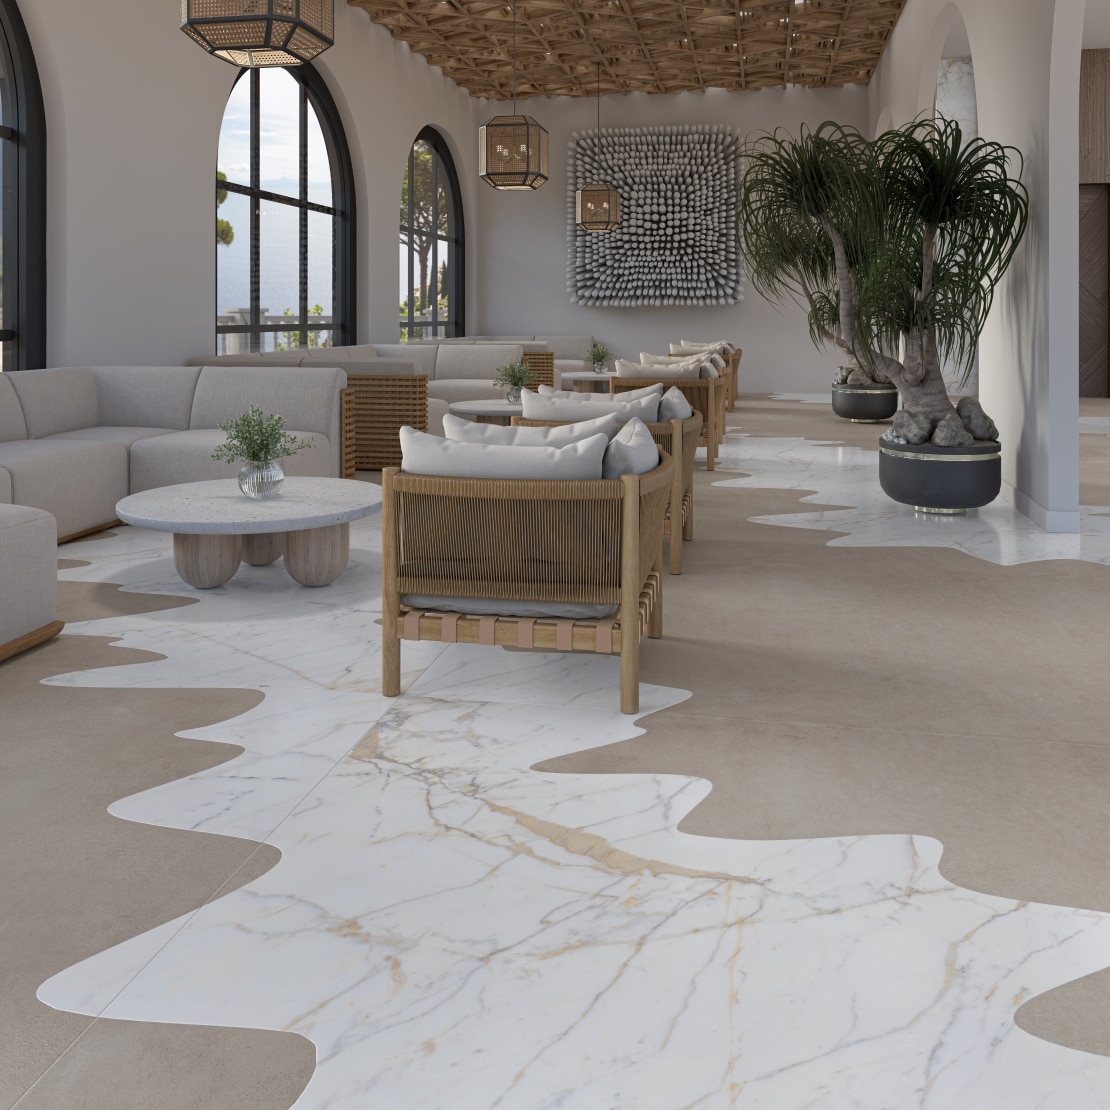 A resort inspired lounge area with a floor that mixes two different products.